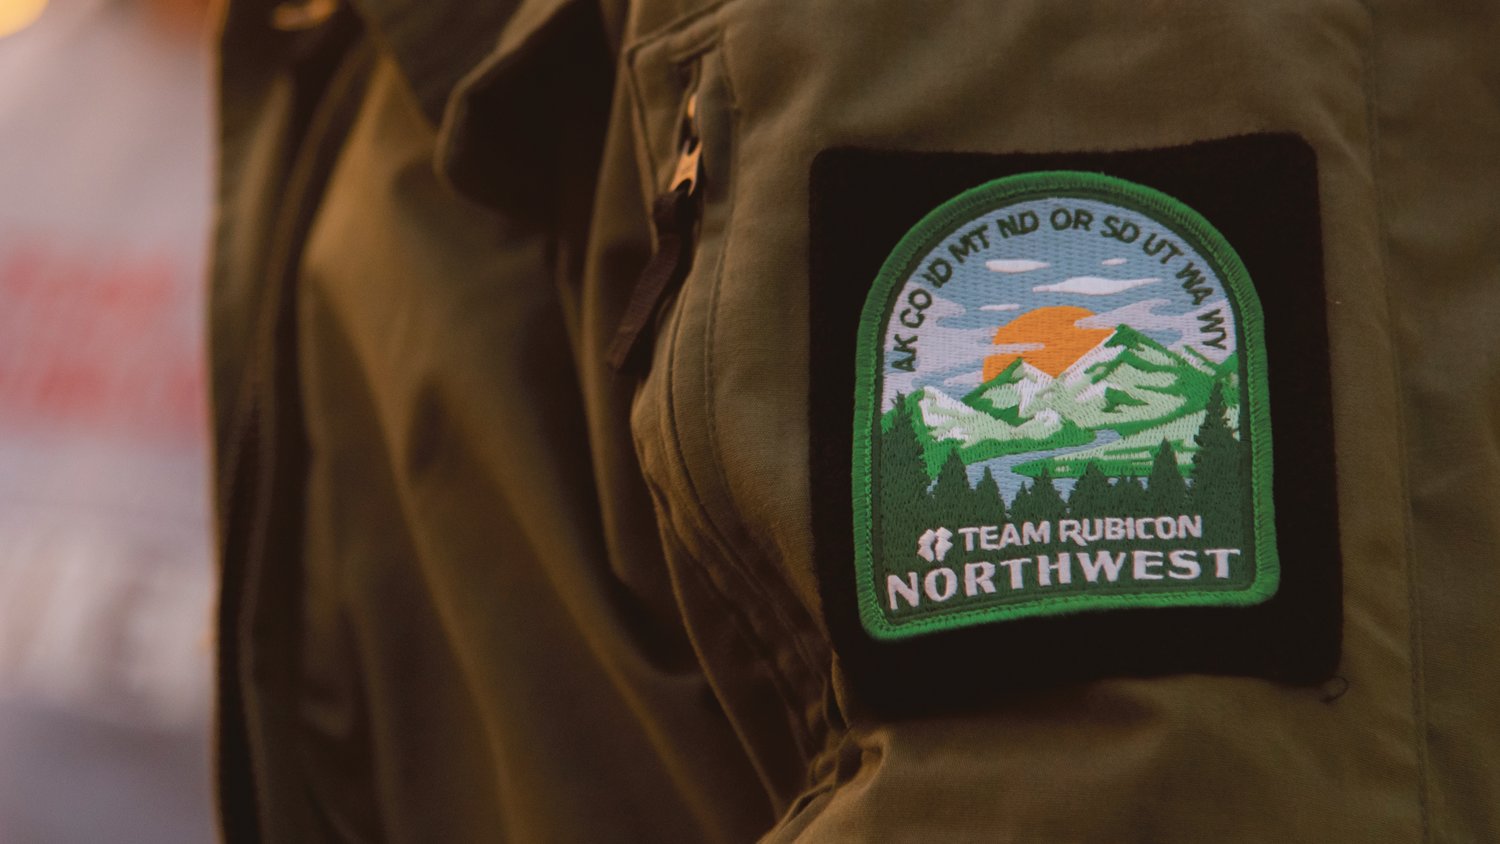 A Team Rubicon Northwest patch is displayed on the jacket of Karl Kaiyala in Centralia on Wednesday.